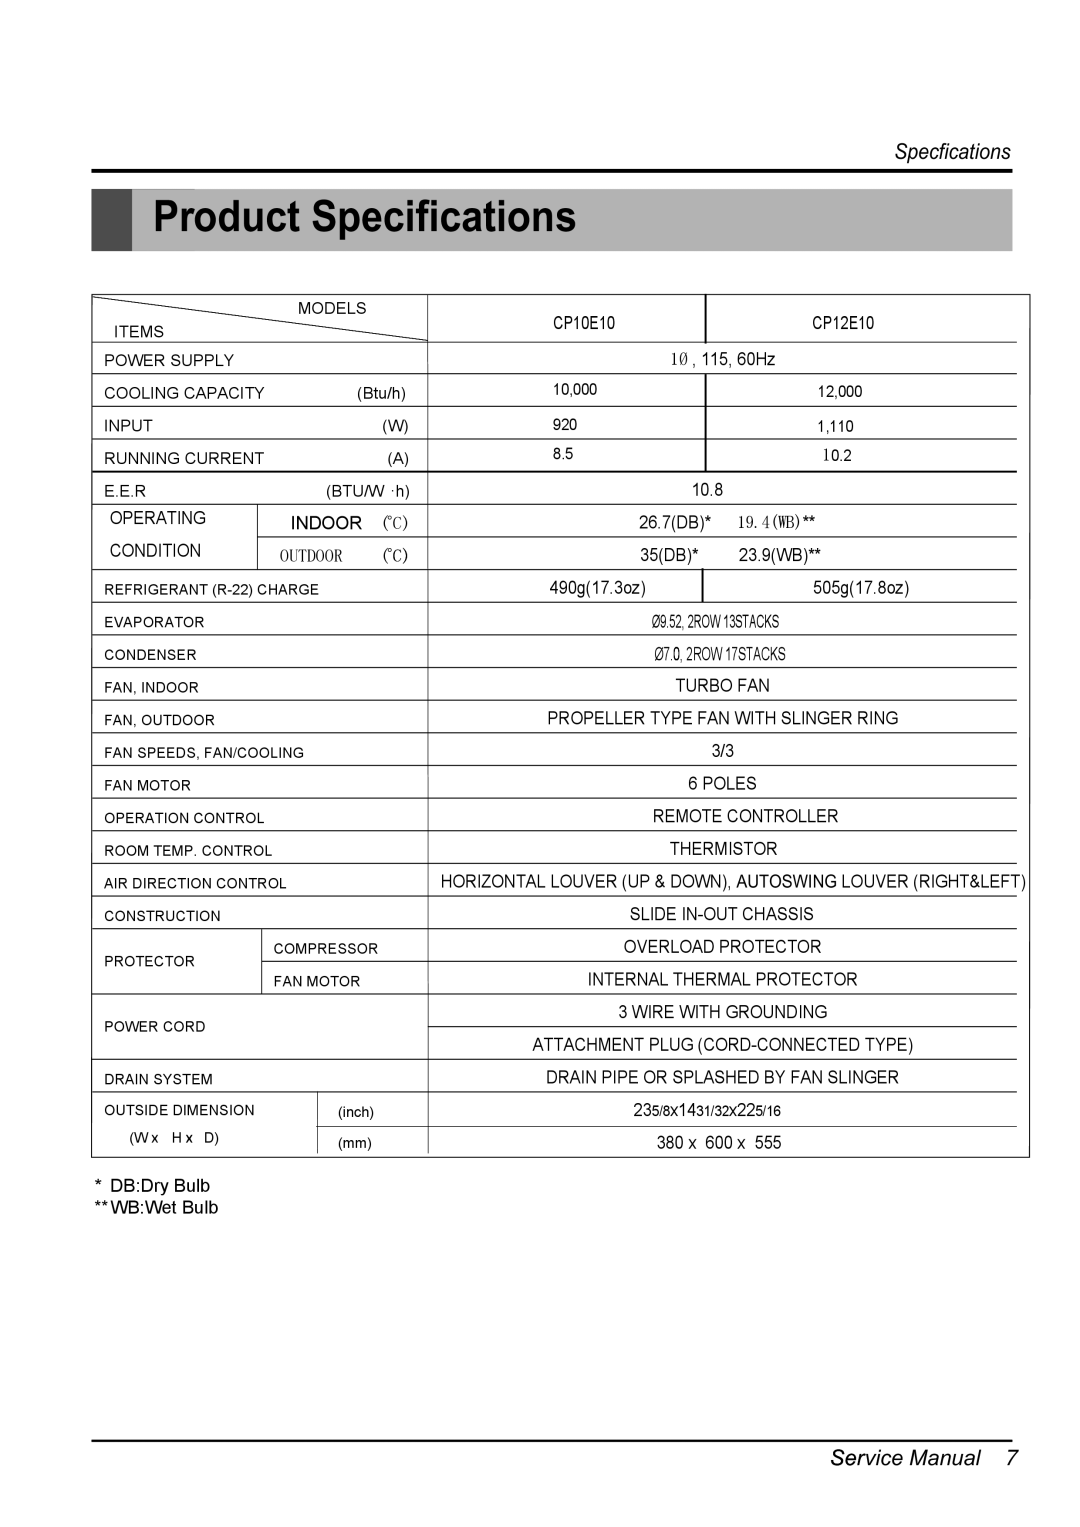 Friedrich CP12E10, CP10E10 manual Product Specifications, Specfications 